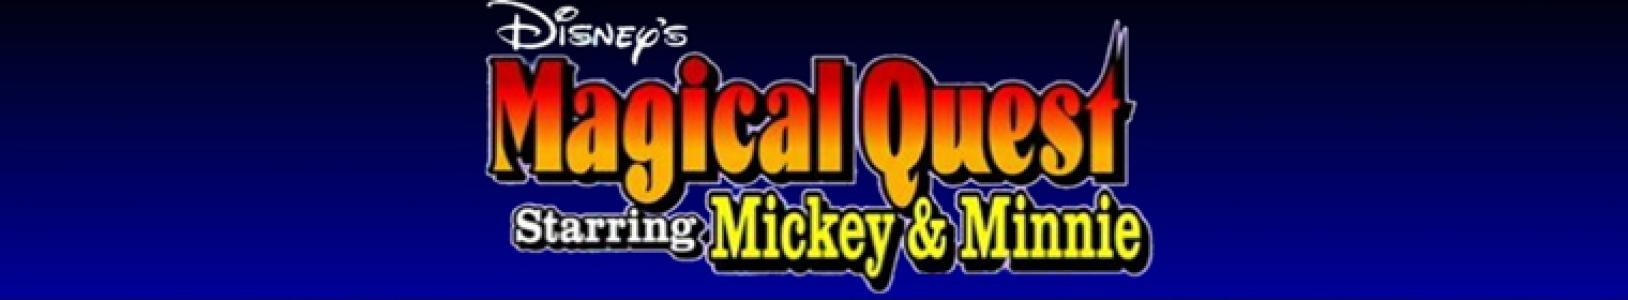 Disney's Magical Quest Starring Mickey & Minnie banner